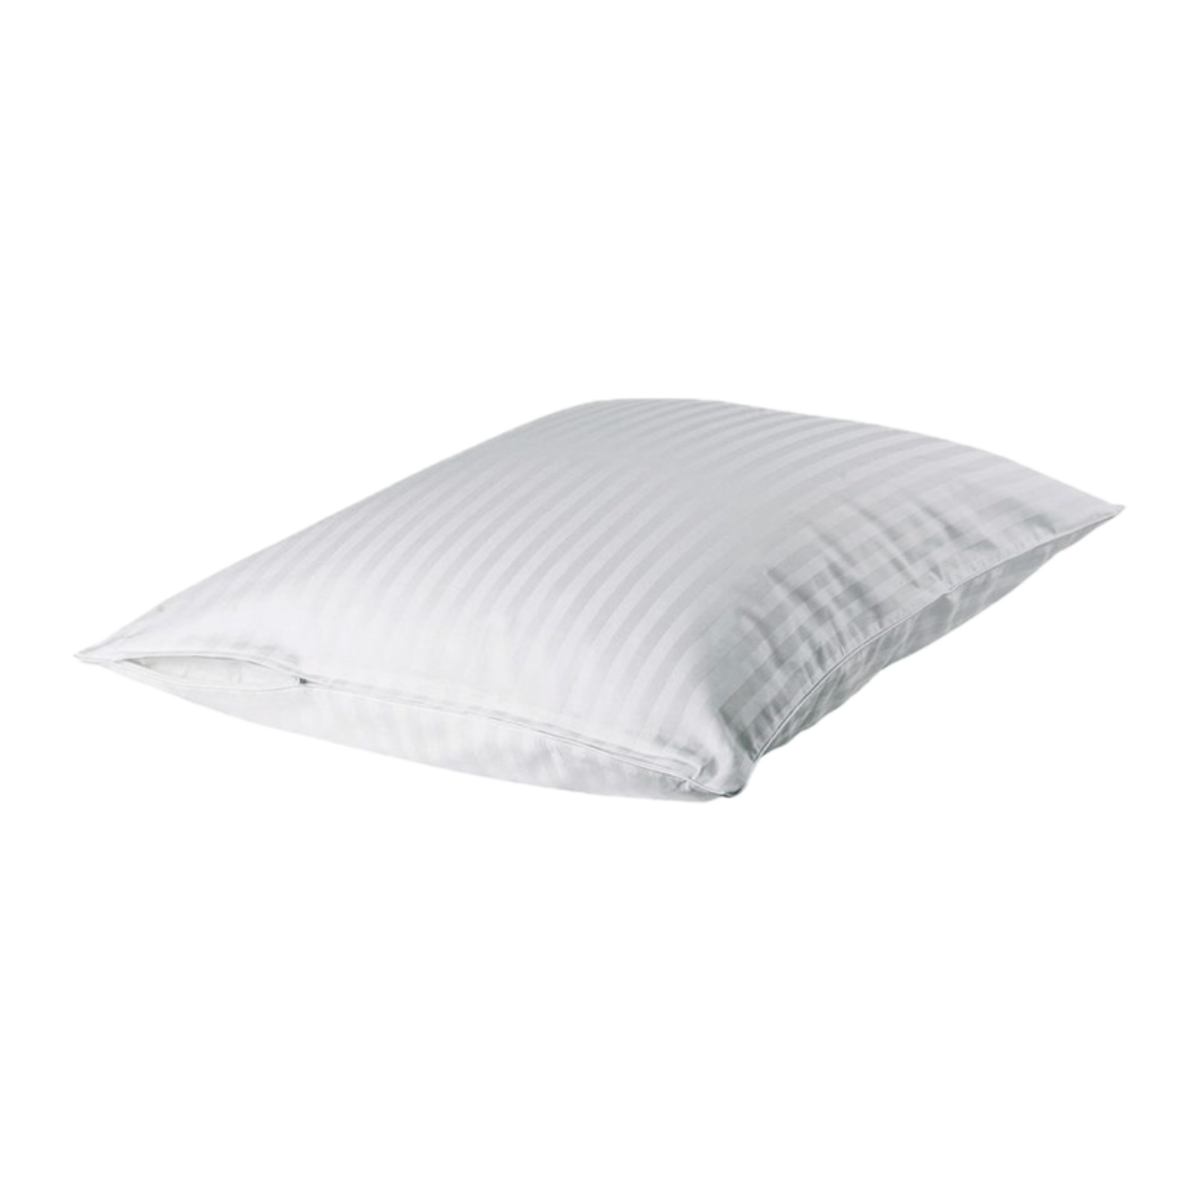 Clear Image of Downtown Company Pillow Protector